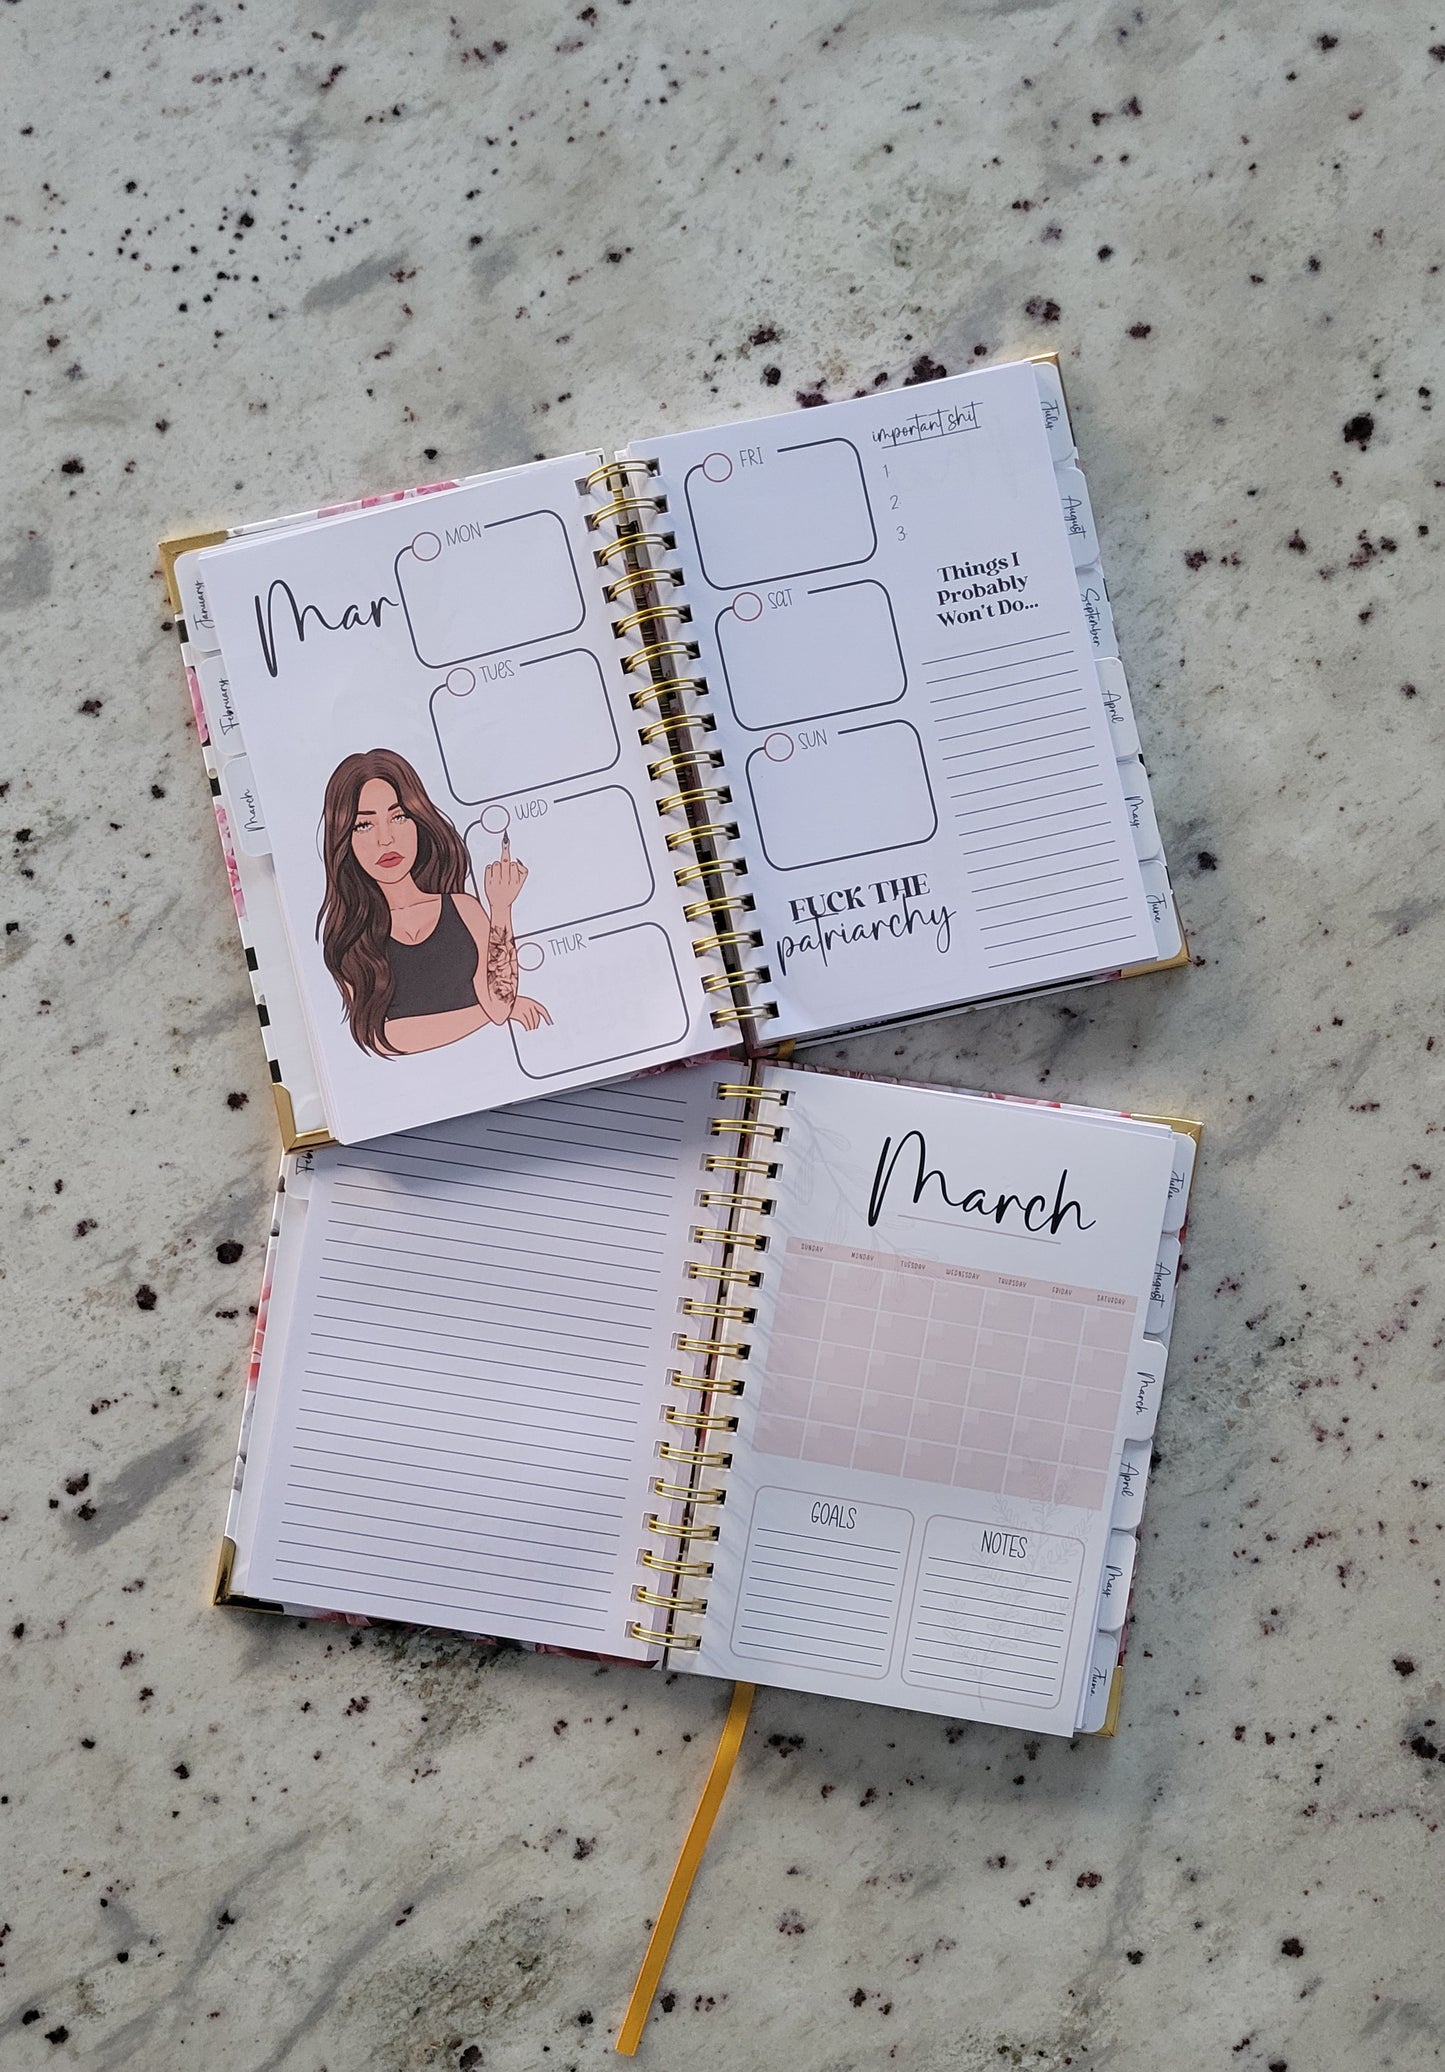 Get Shit Done Undated Sweary Planner | Day Planner